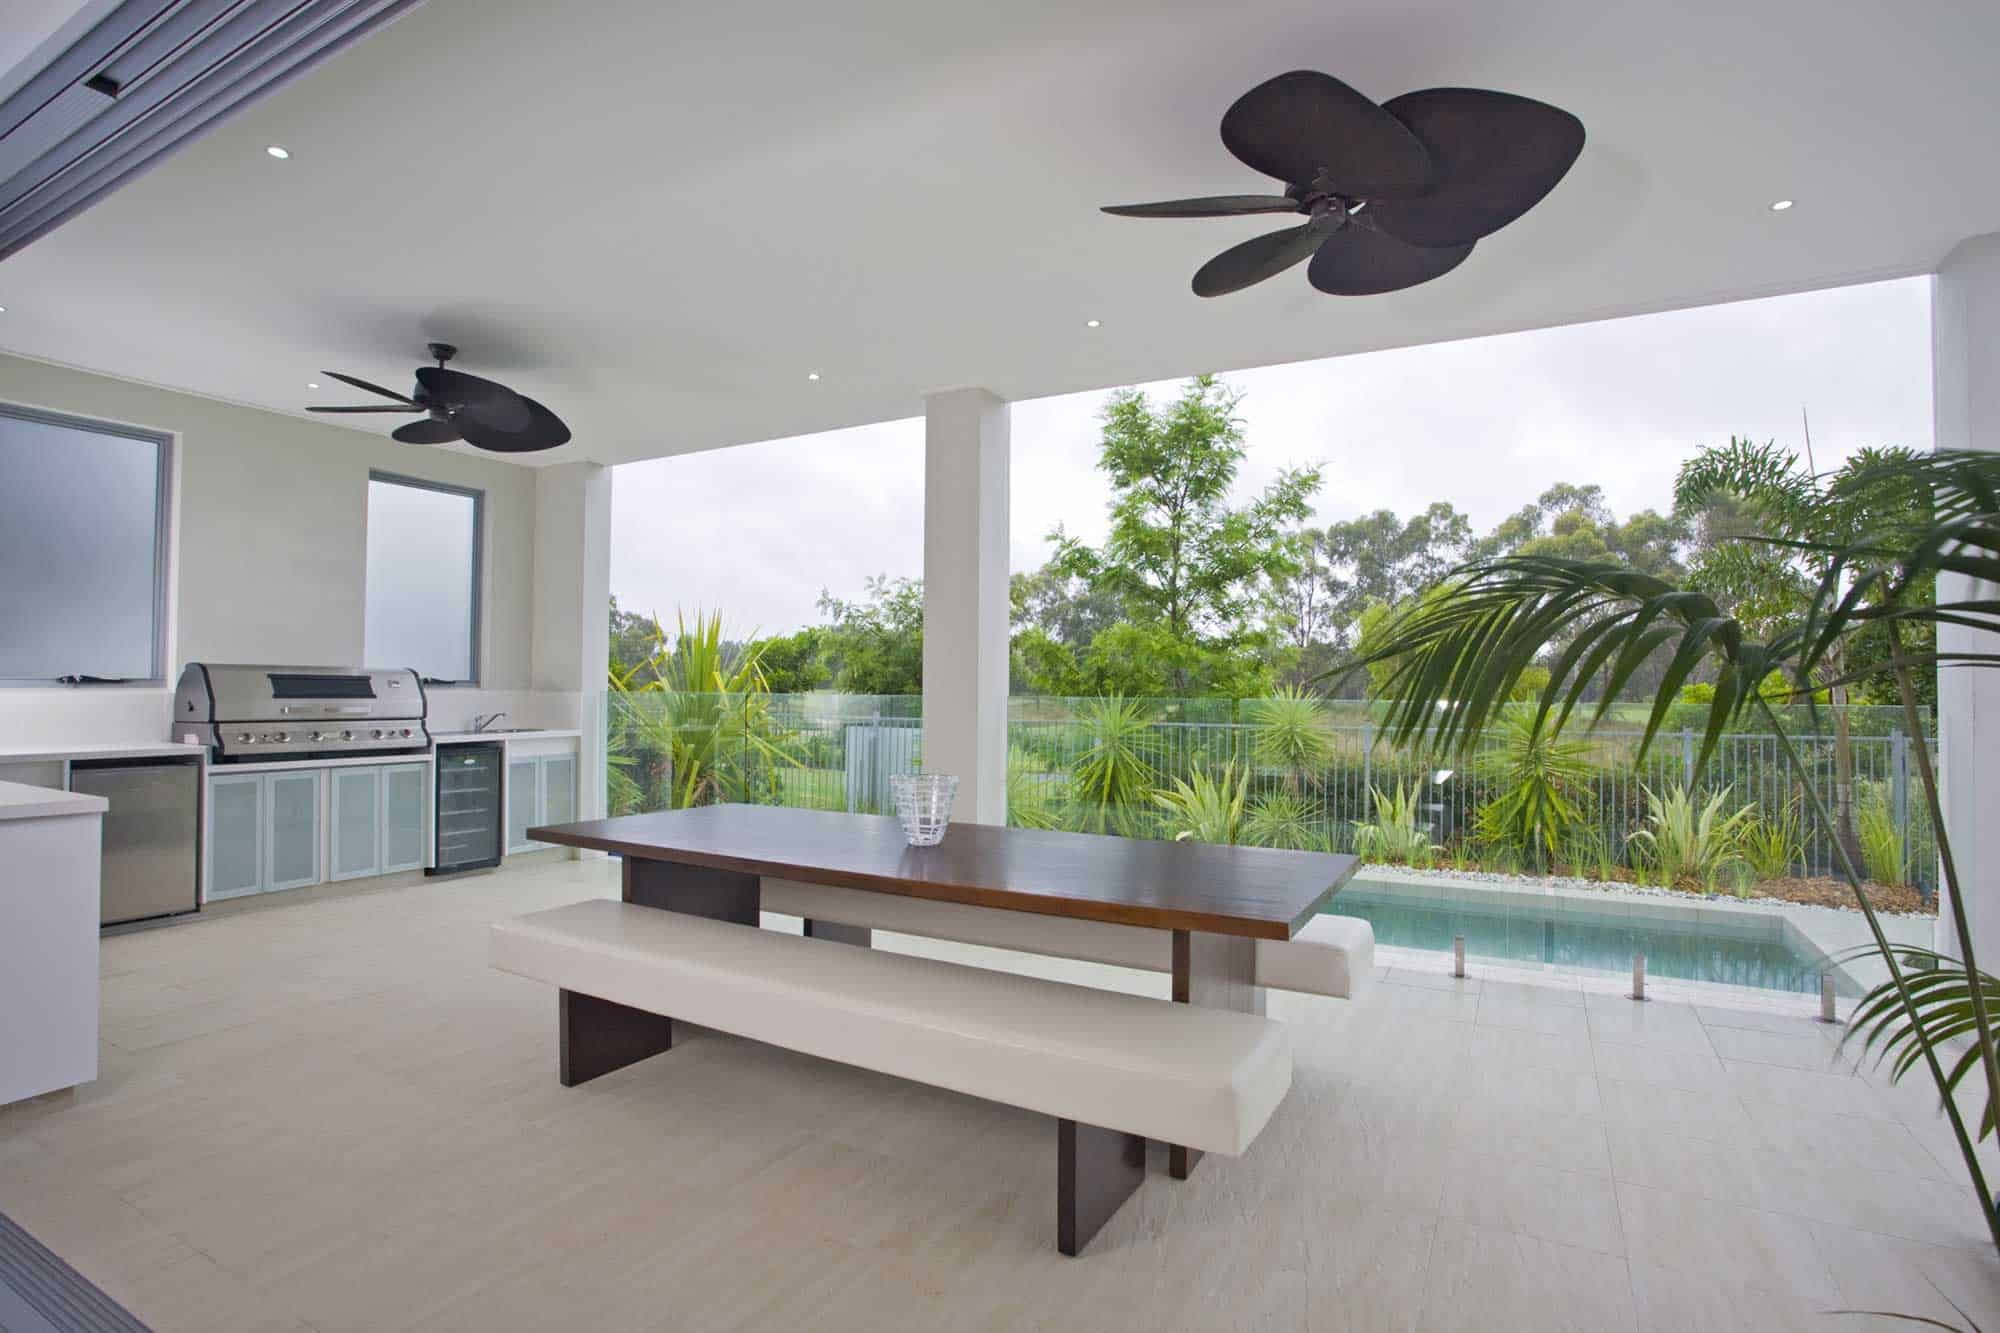 Contemporary outdoor kitchen with dining table